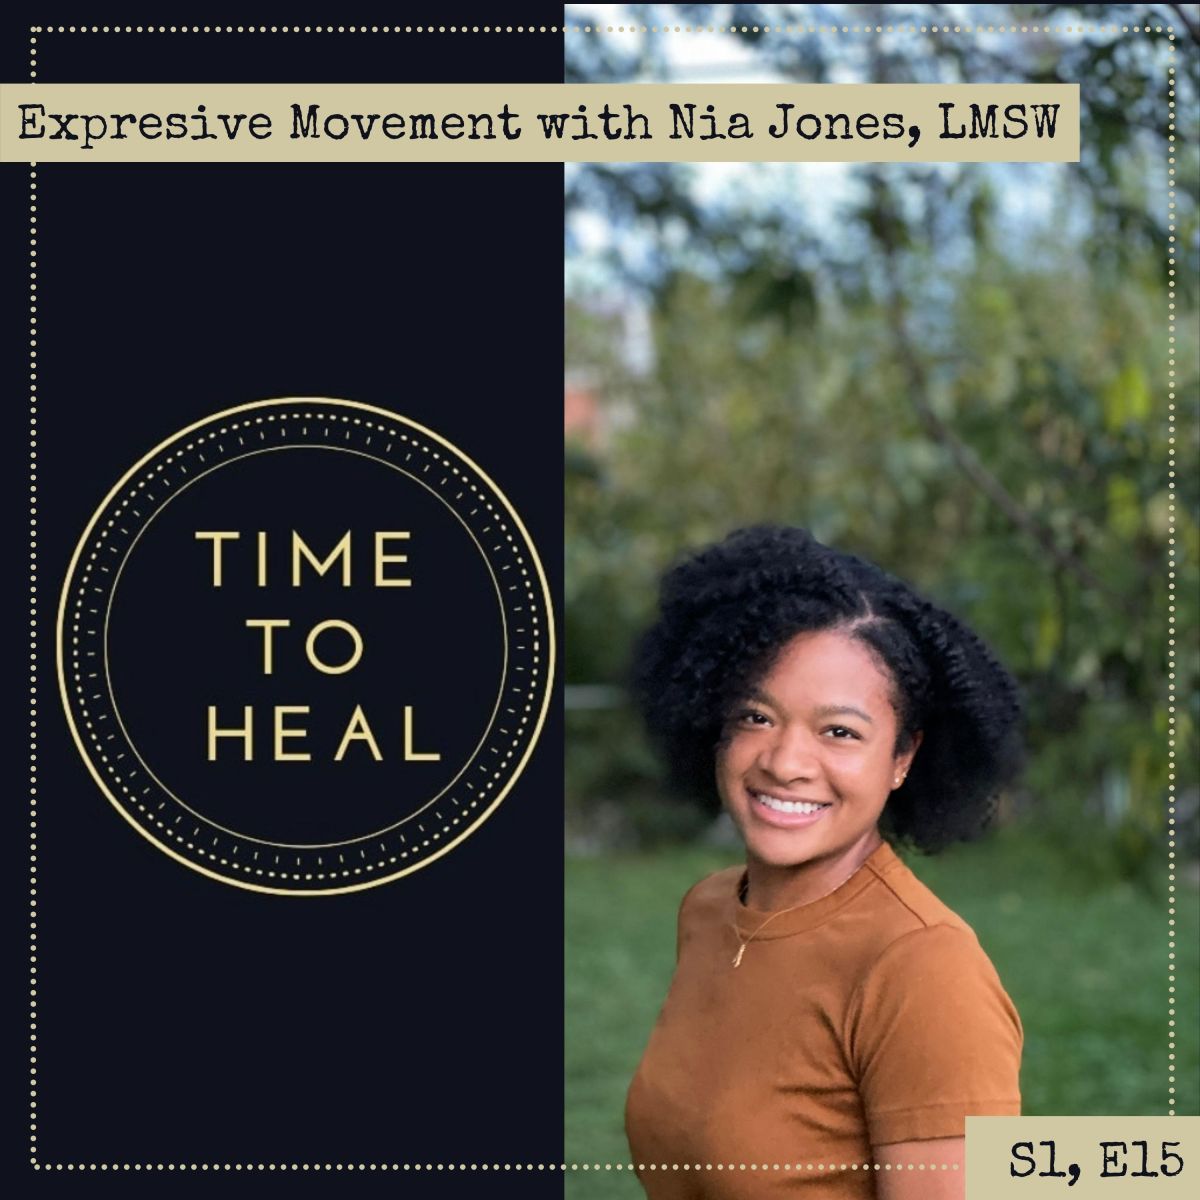 Expressive Movement and Intersectionality with Nia Jones, LMSW